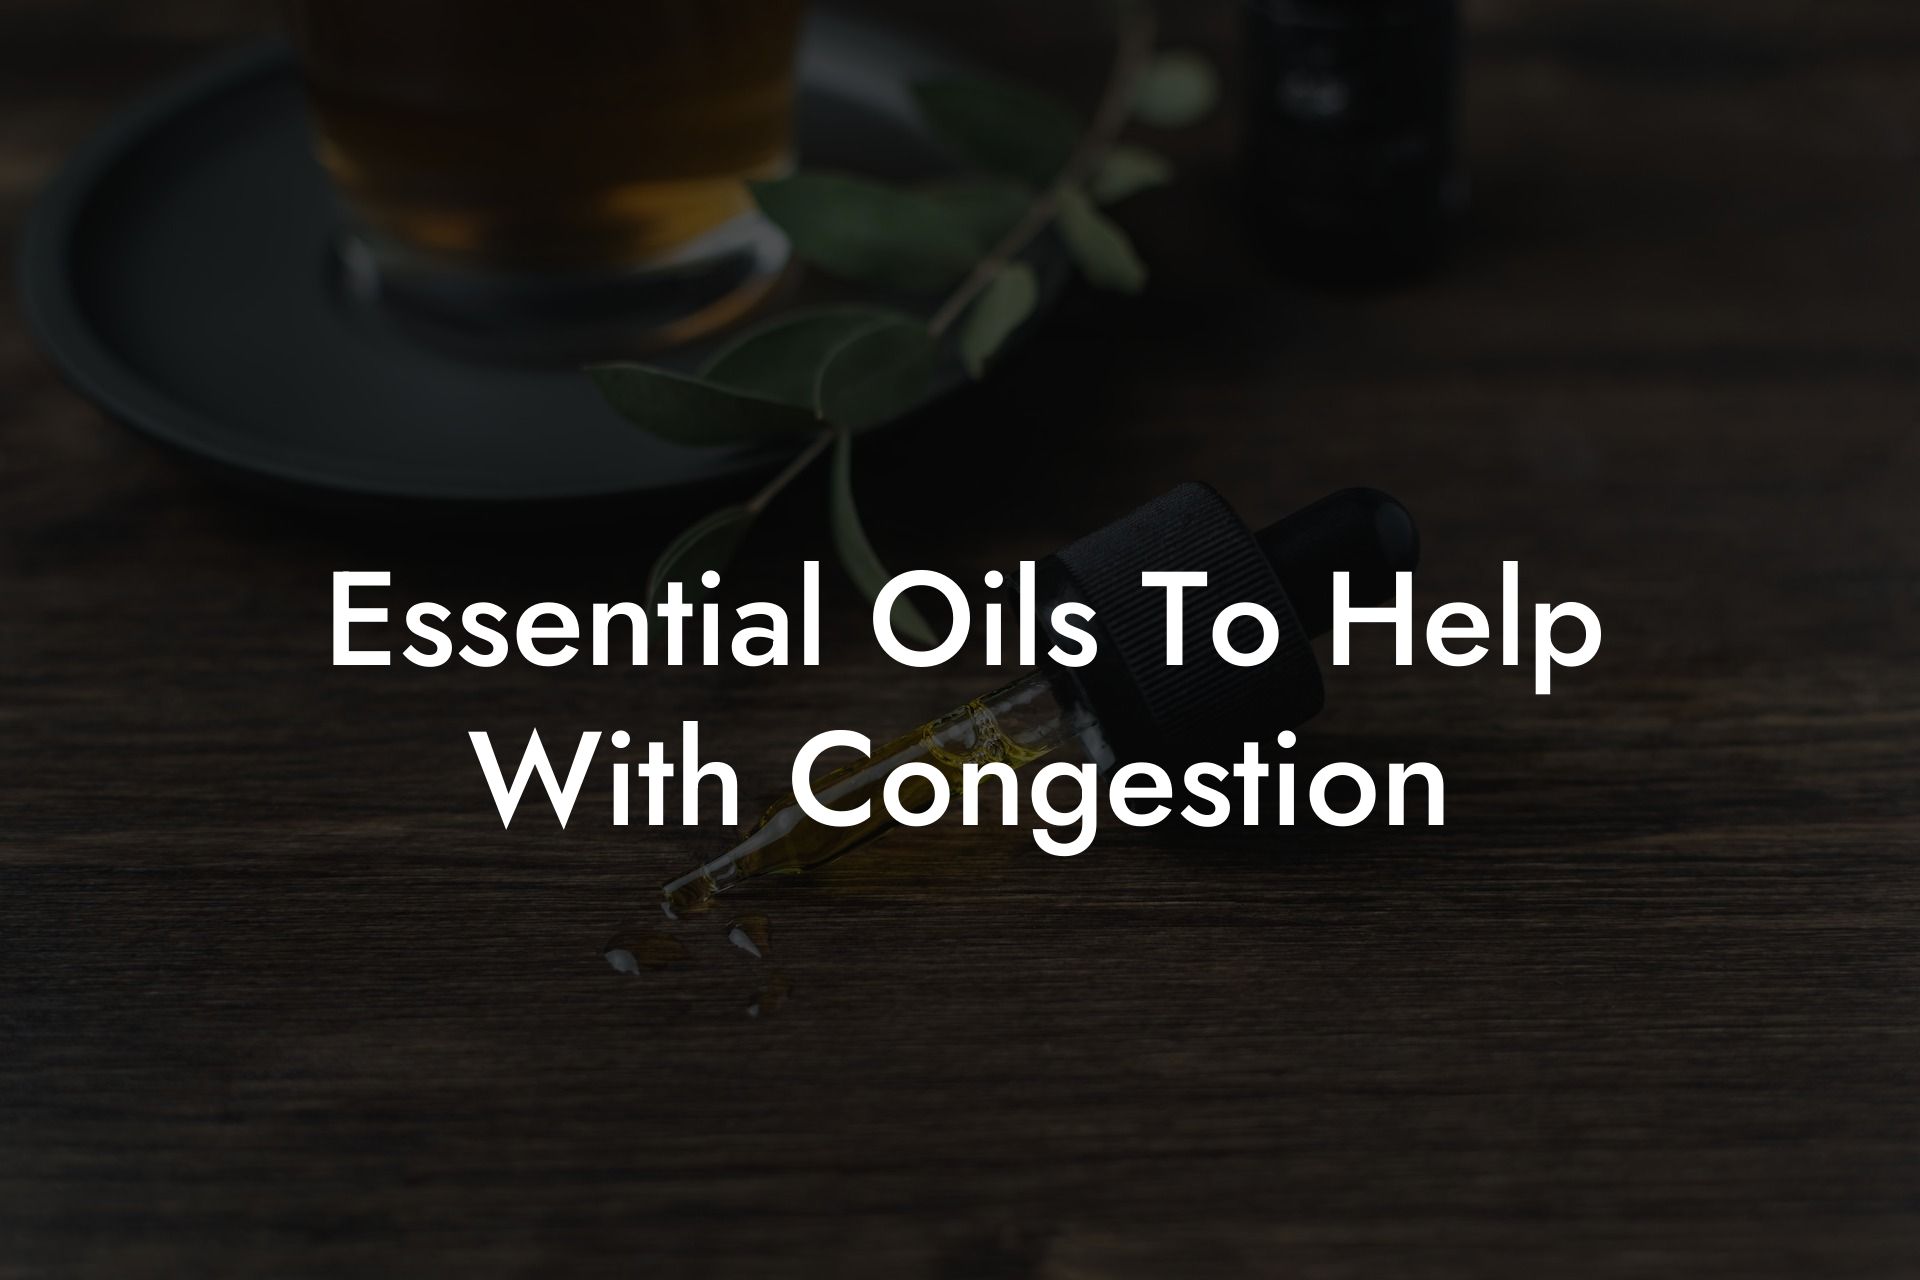 Essential Oils To Help With Congestion